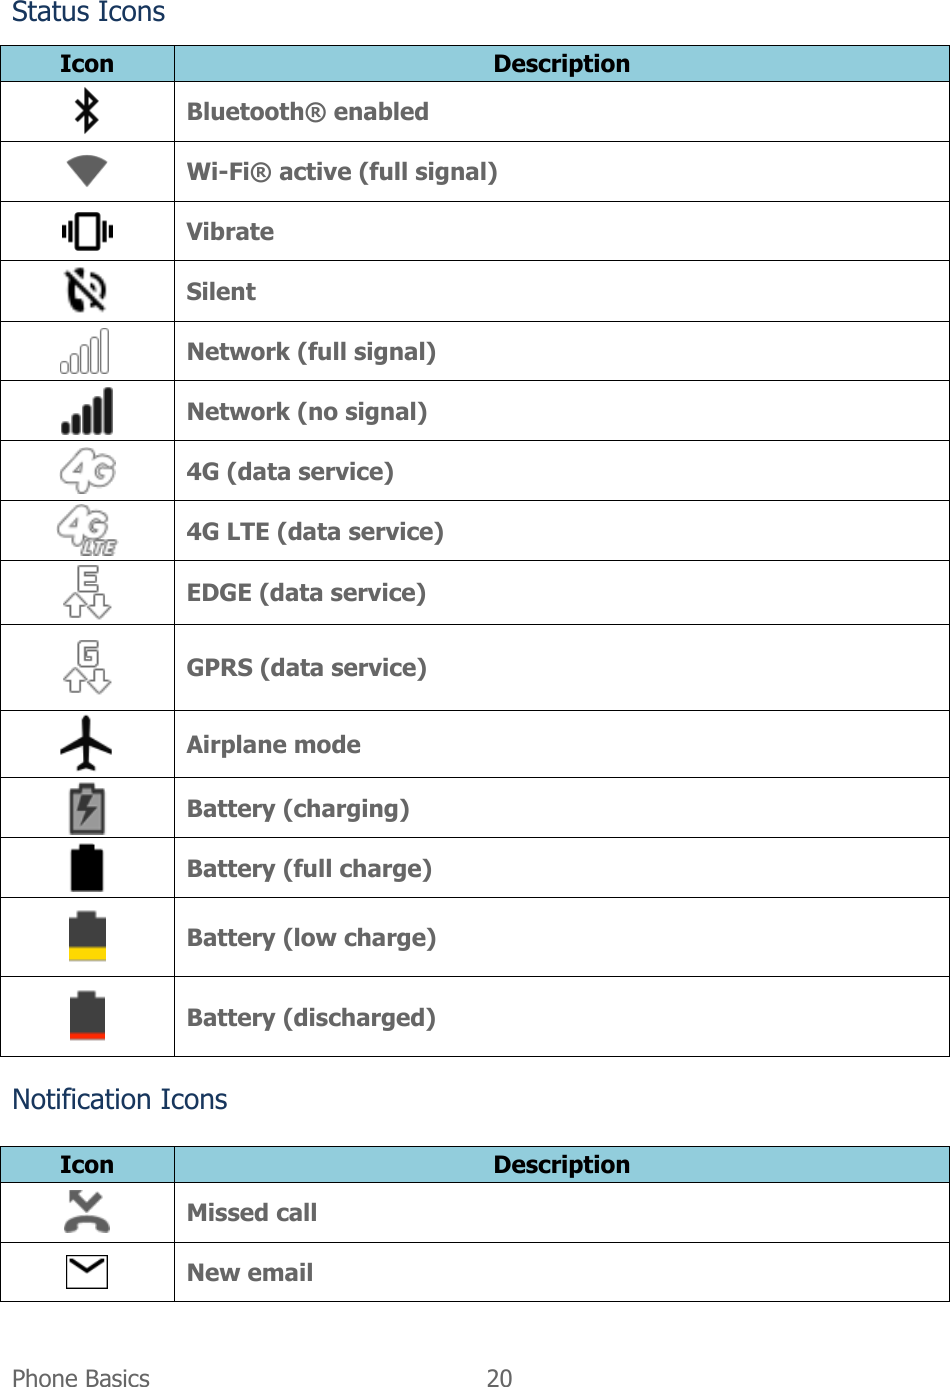  Phone Basics  20   Status Icons Icon Description  Bluetooth® enabled  Wi-Fi® active (full signal)  Vibrate  Silent  Network (full signal)  Network (no signal)  4G (data service)  4G LTE (data service)  EDGE (data service)  GPRS (data service)  Airplane mode  Battery (charging)  Battery (full charge)  Battery (low charge)  Battery (discharged) Notification Icons Icon Description  Missed call  New email 